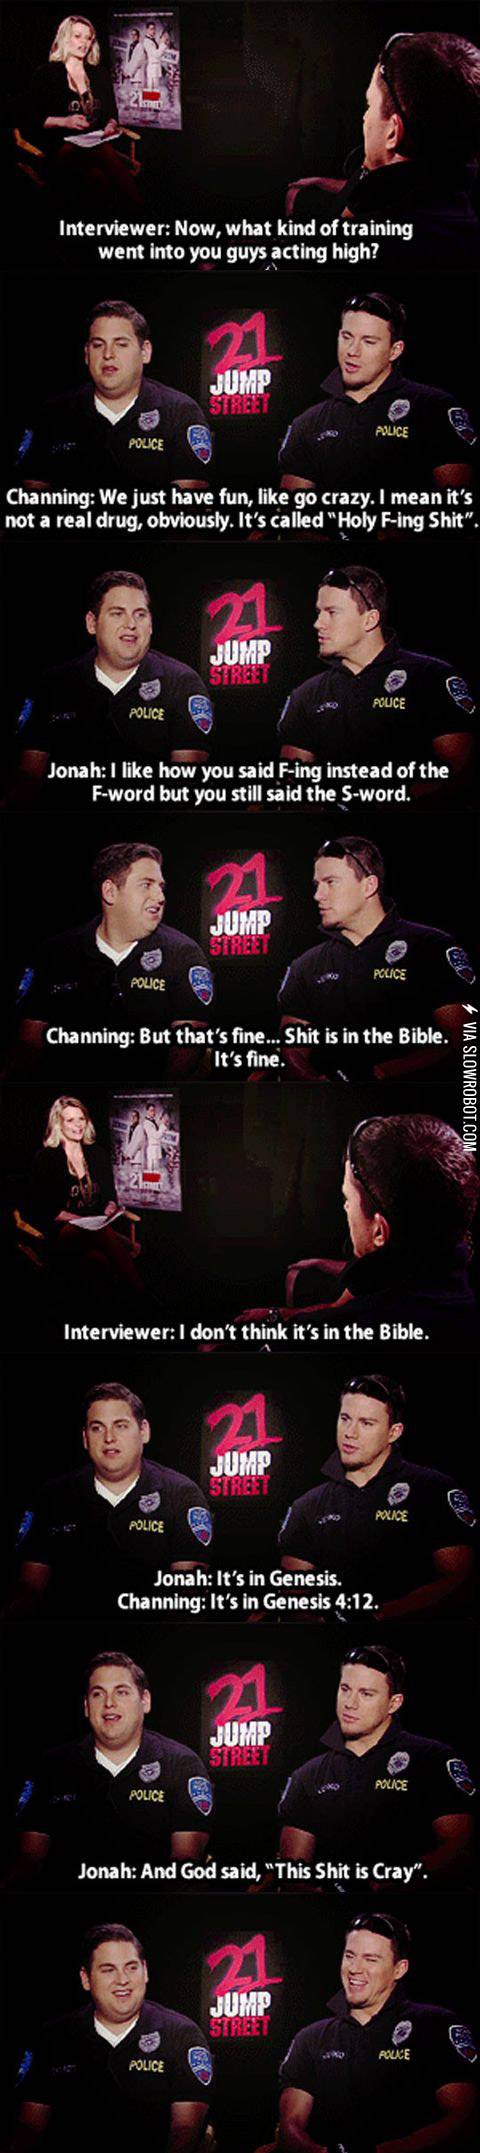 Channing+and+Jonah+are+awesome.